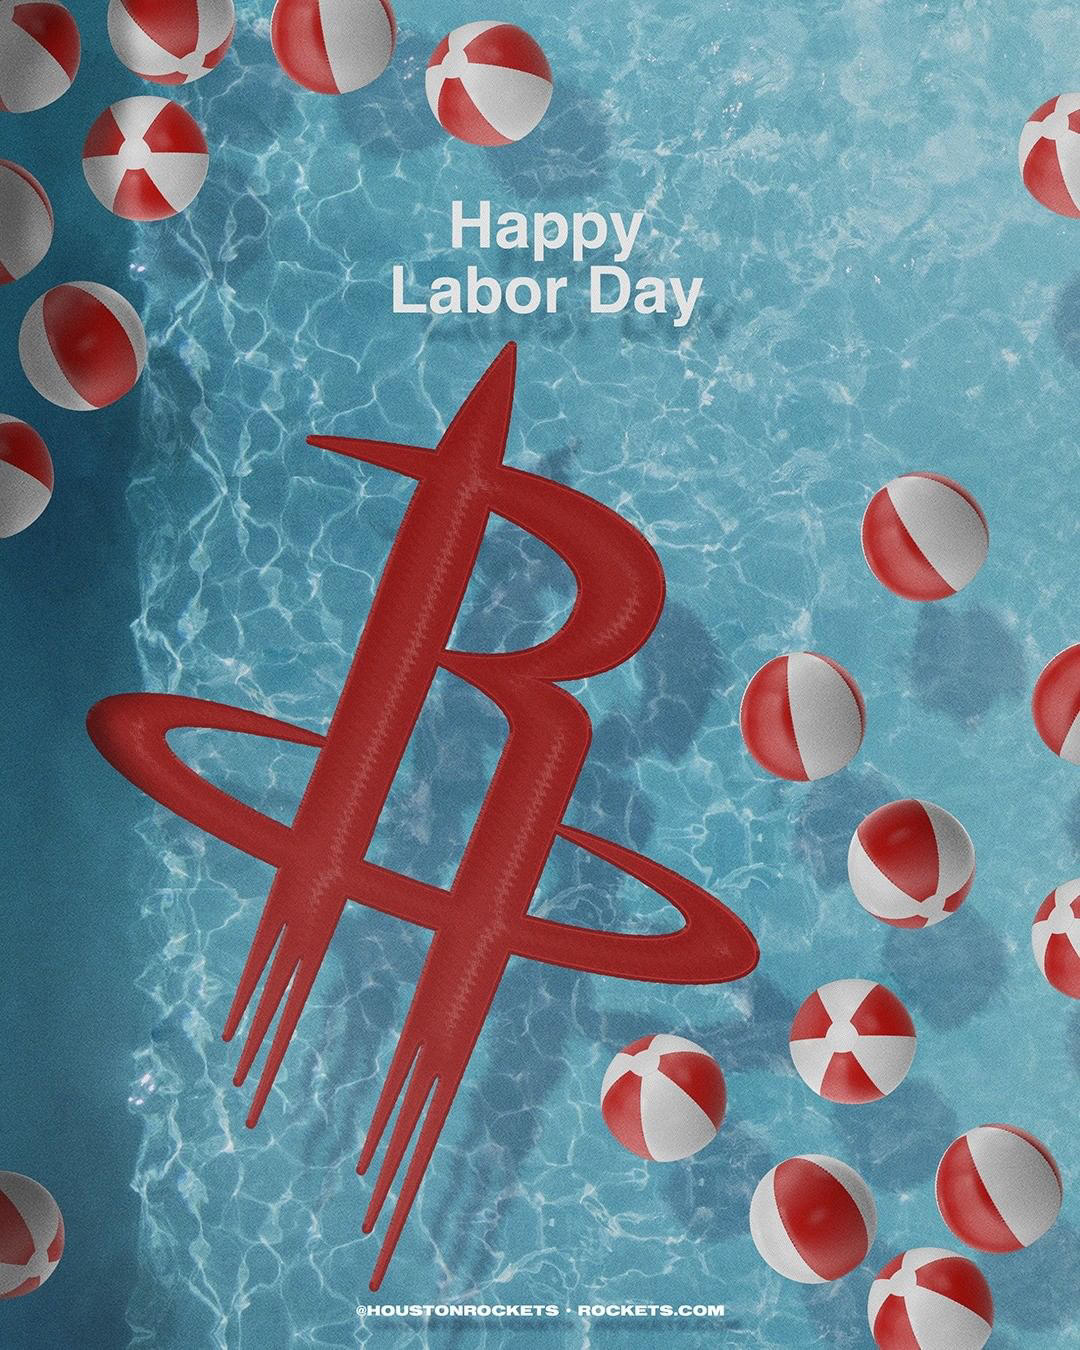 Houston Rockets - Have a safe and happy Labor Day, H-Town